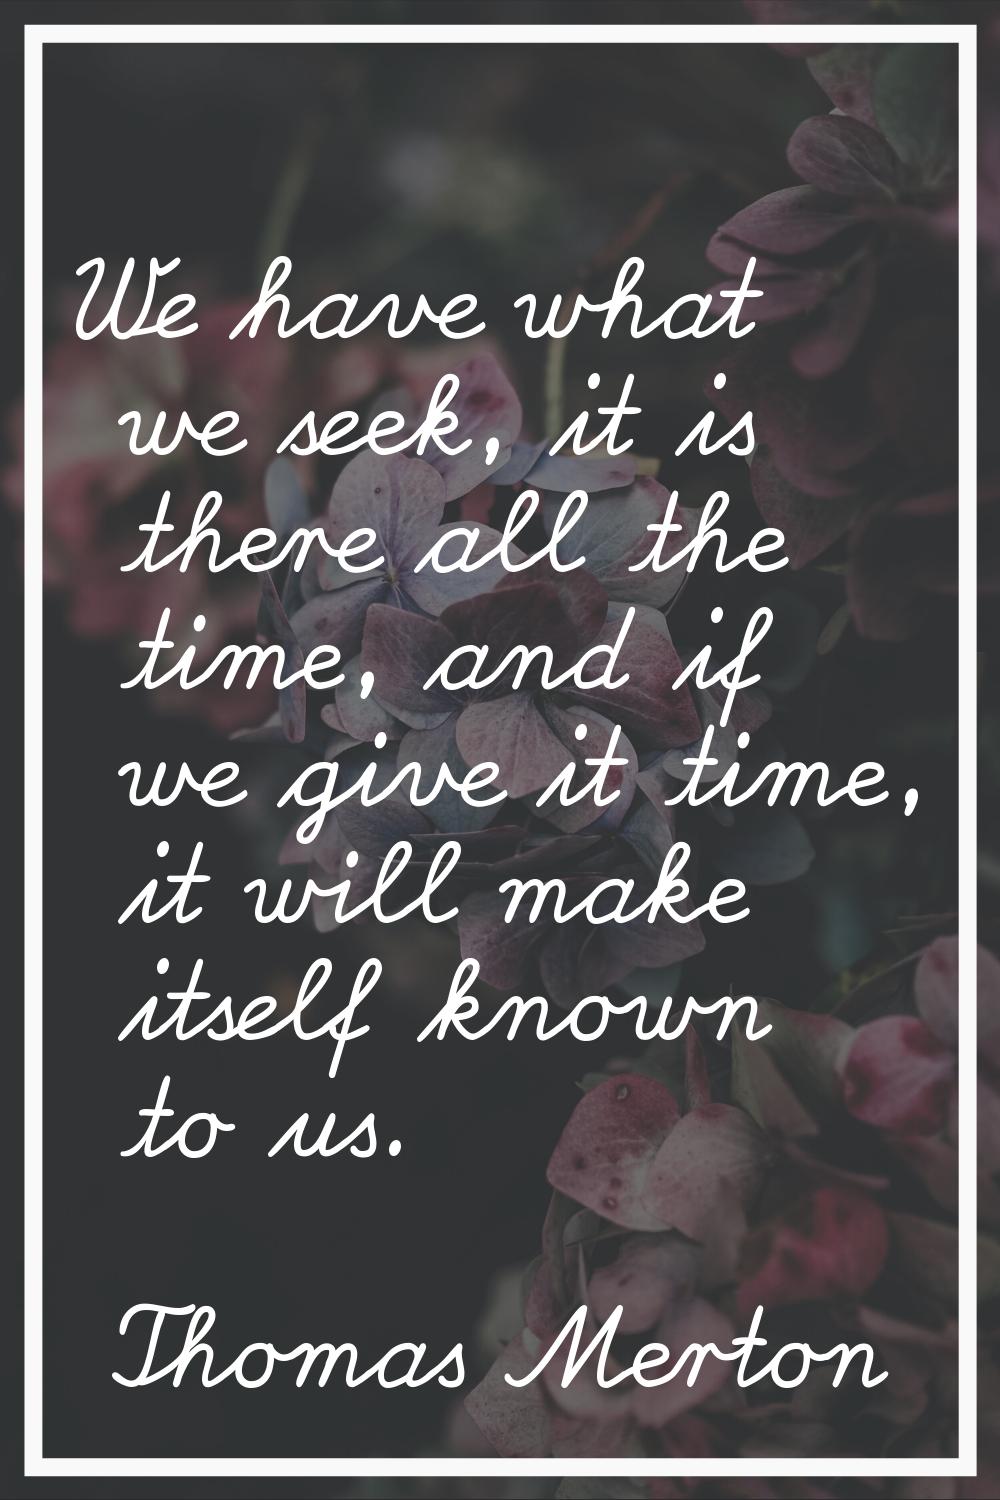 We have what we seek, it is there all the time, and if we give it time, it will make itself known t